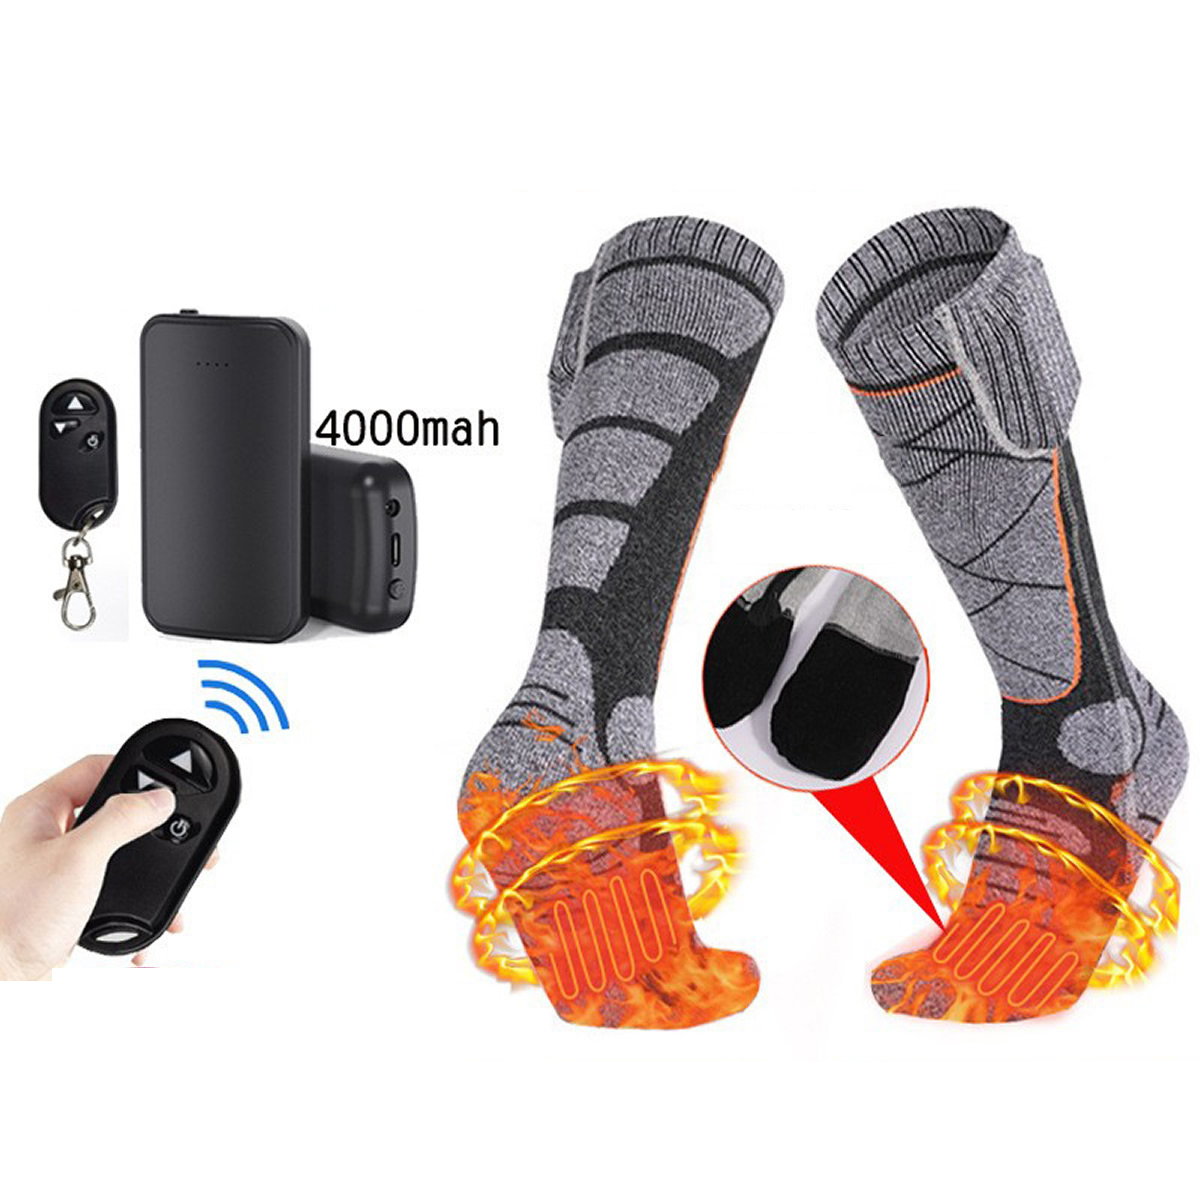 Dark gray:Single sock (sole and instep heat), remote control, battery